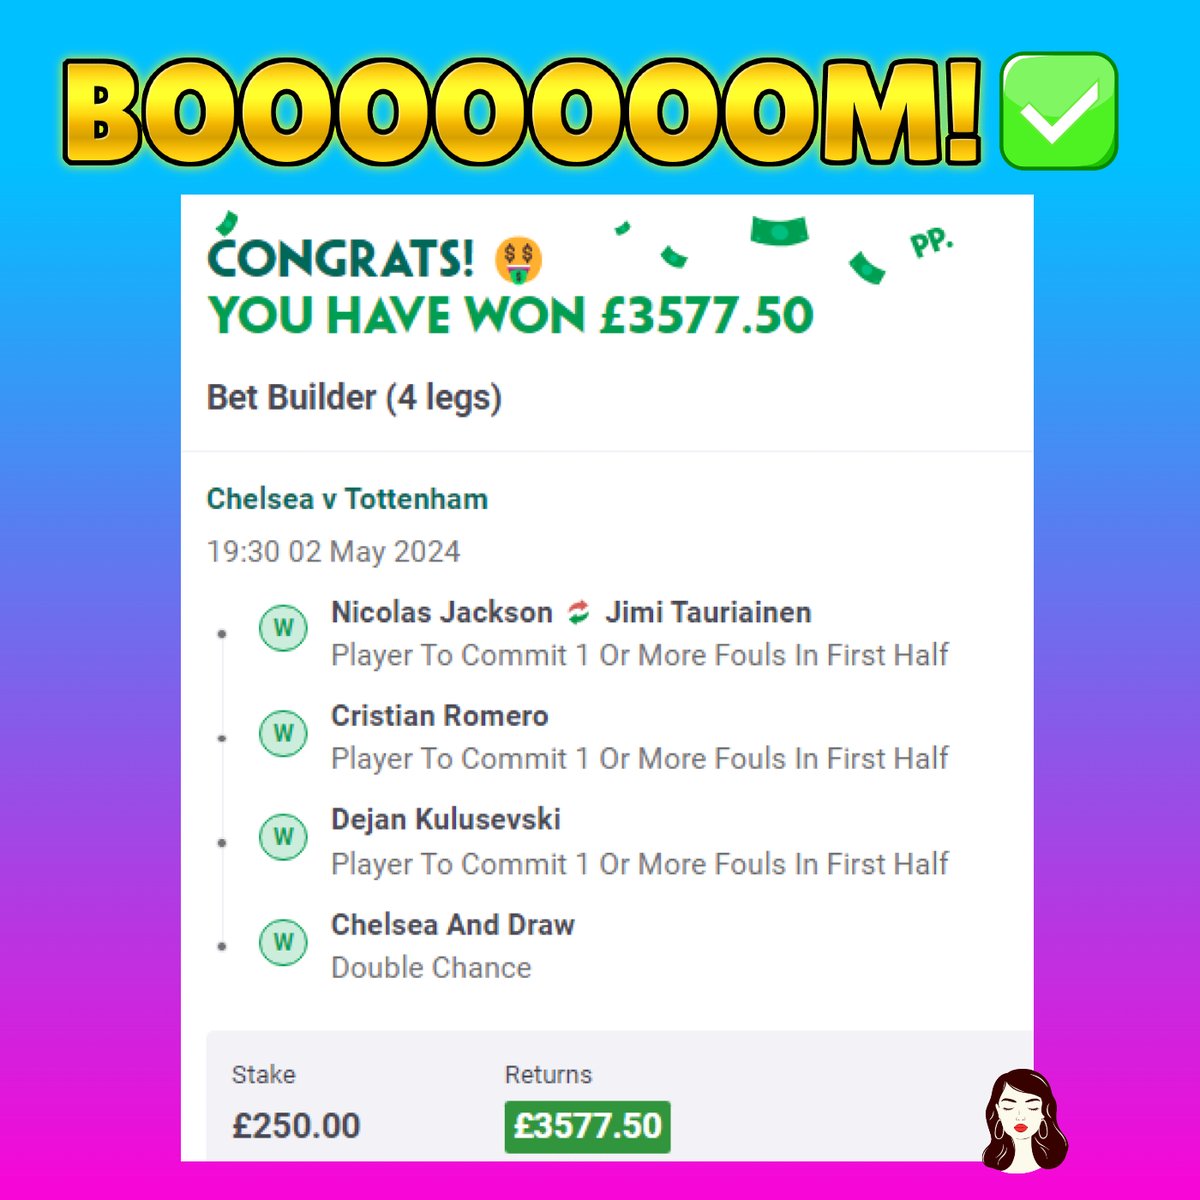 BOOOOOOOOOOOOOOOM! 😍✅

MY 13/1 BET BUILDER LANDS IN 10 MINUTES!🔥

No other tipster wins this many longshots! 😜

SMASH LIKE ♥️ if you want more bet builders this weekend

Make sure you follow me if you want a tipster who actually wins🔔